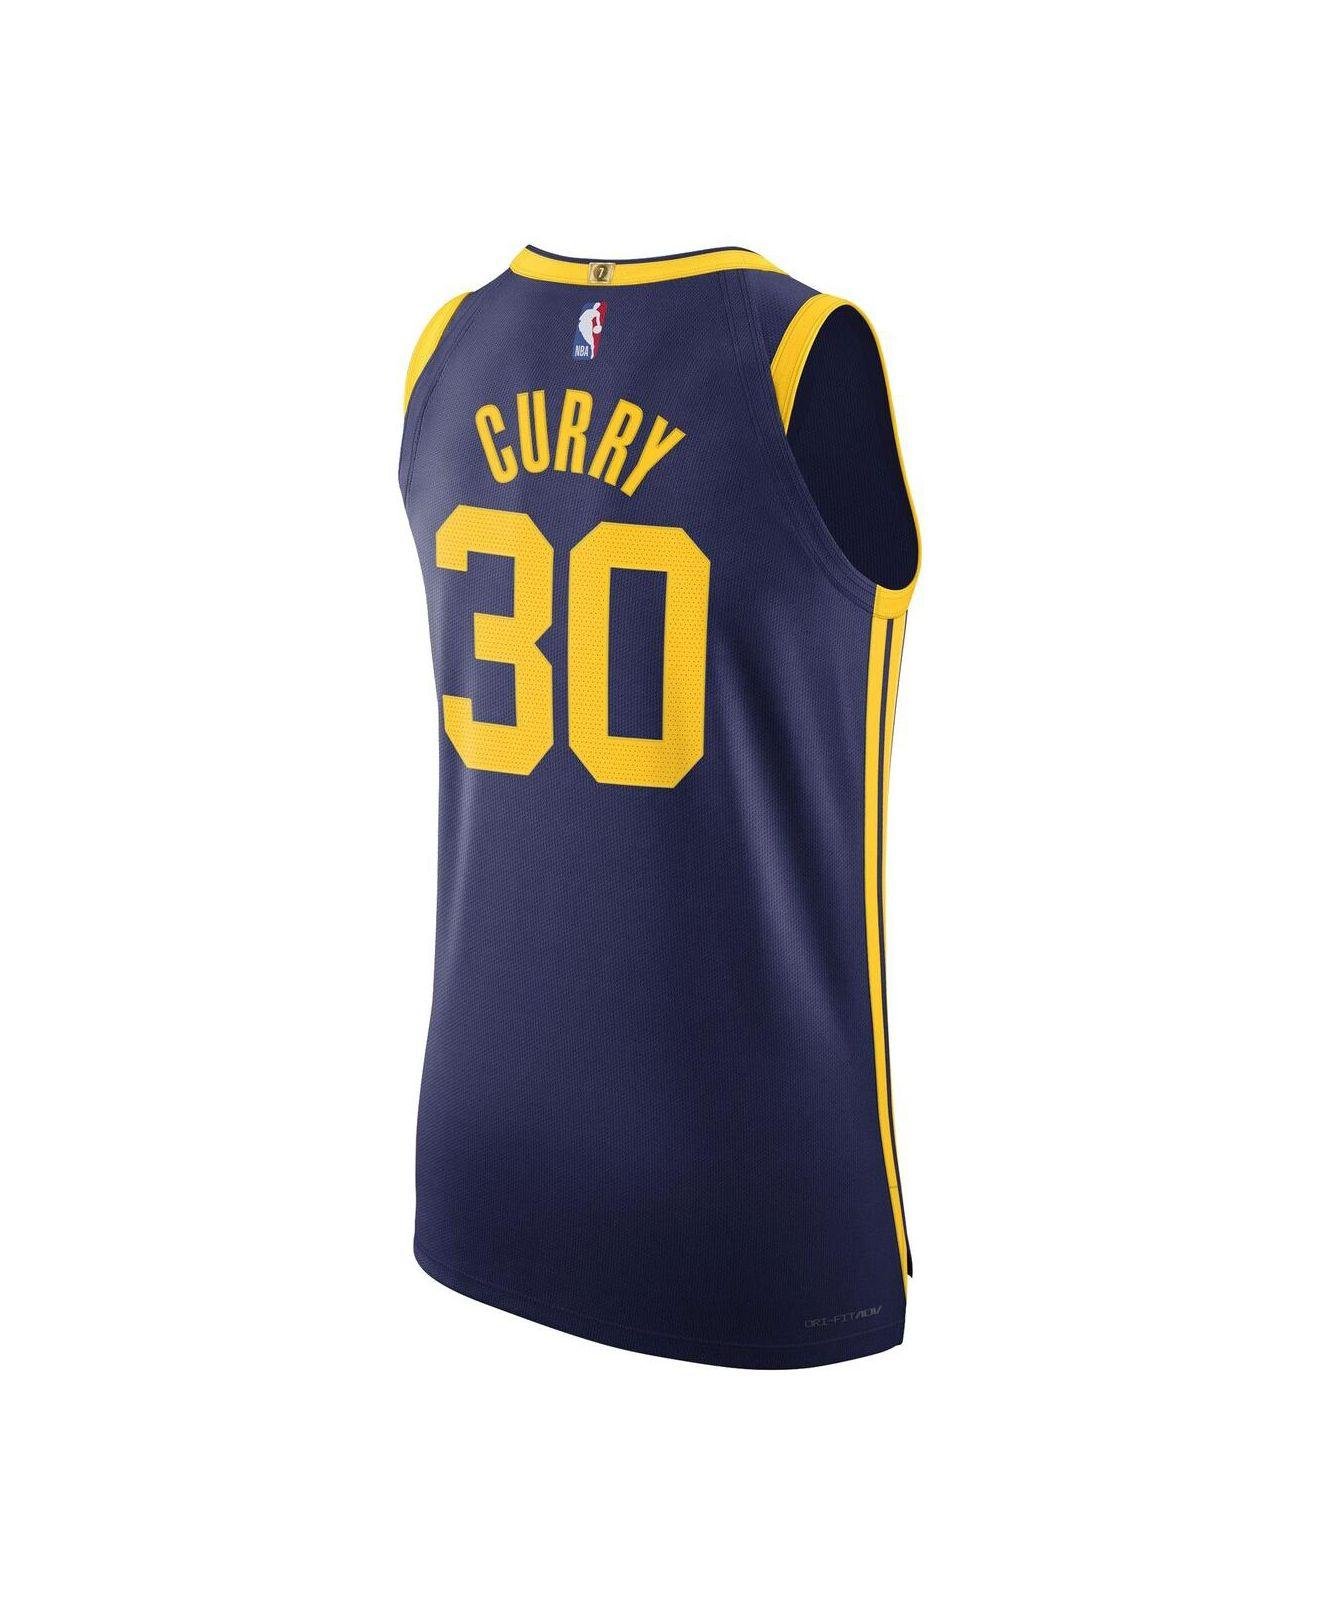 Nike Brand Stephen Curry Royal Golden State Warriors Authentic Player Jersey  - Statement Edition in Blue for Men